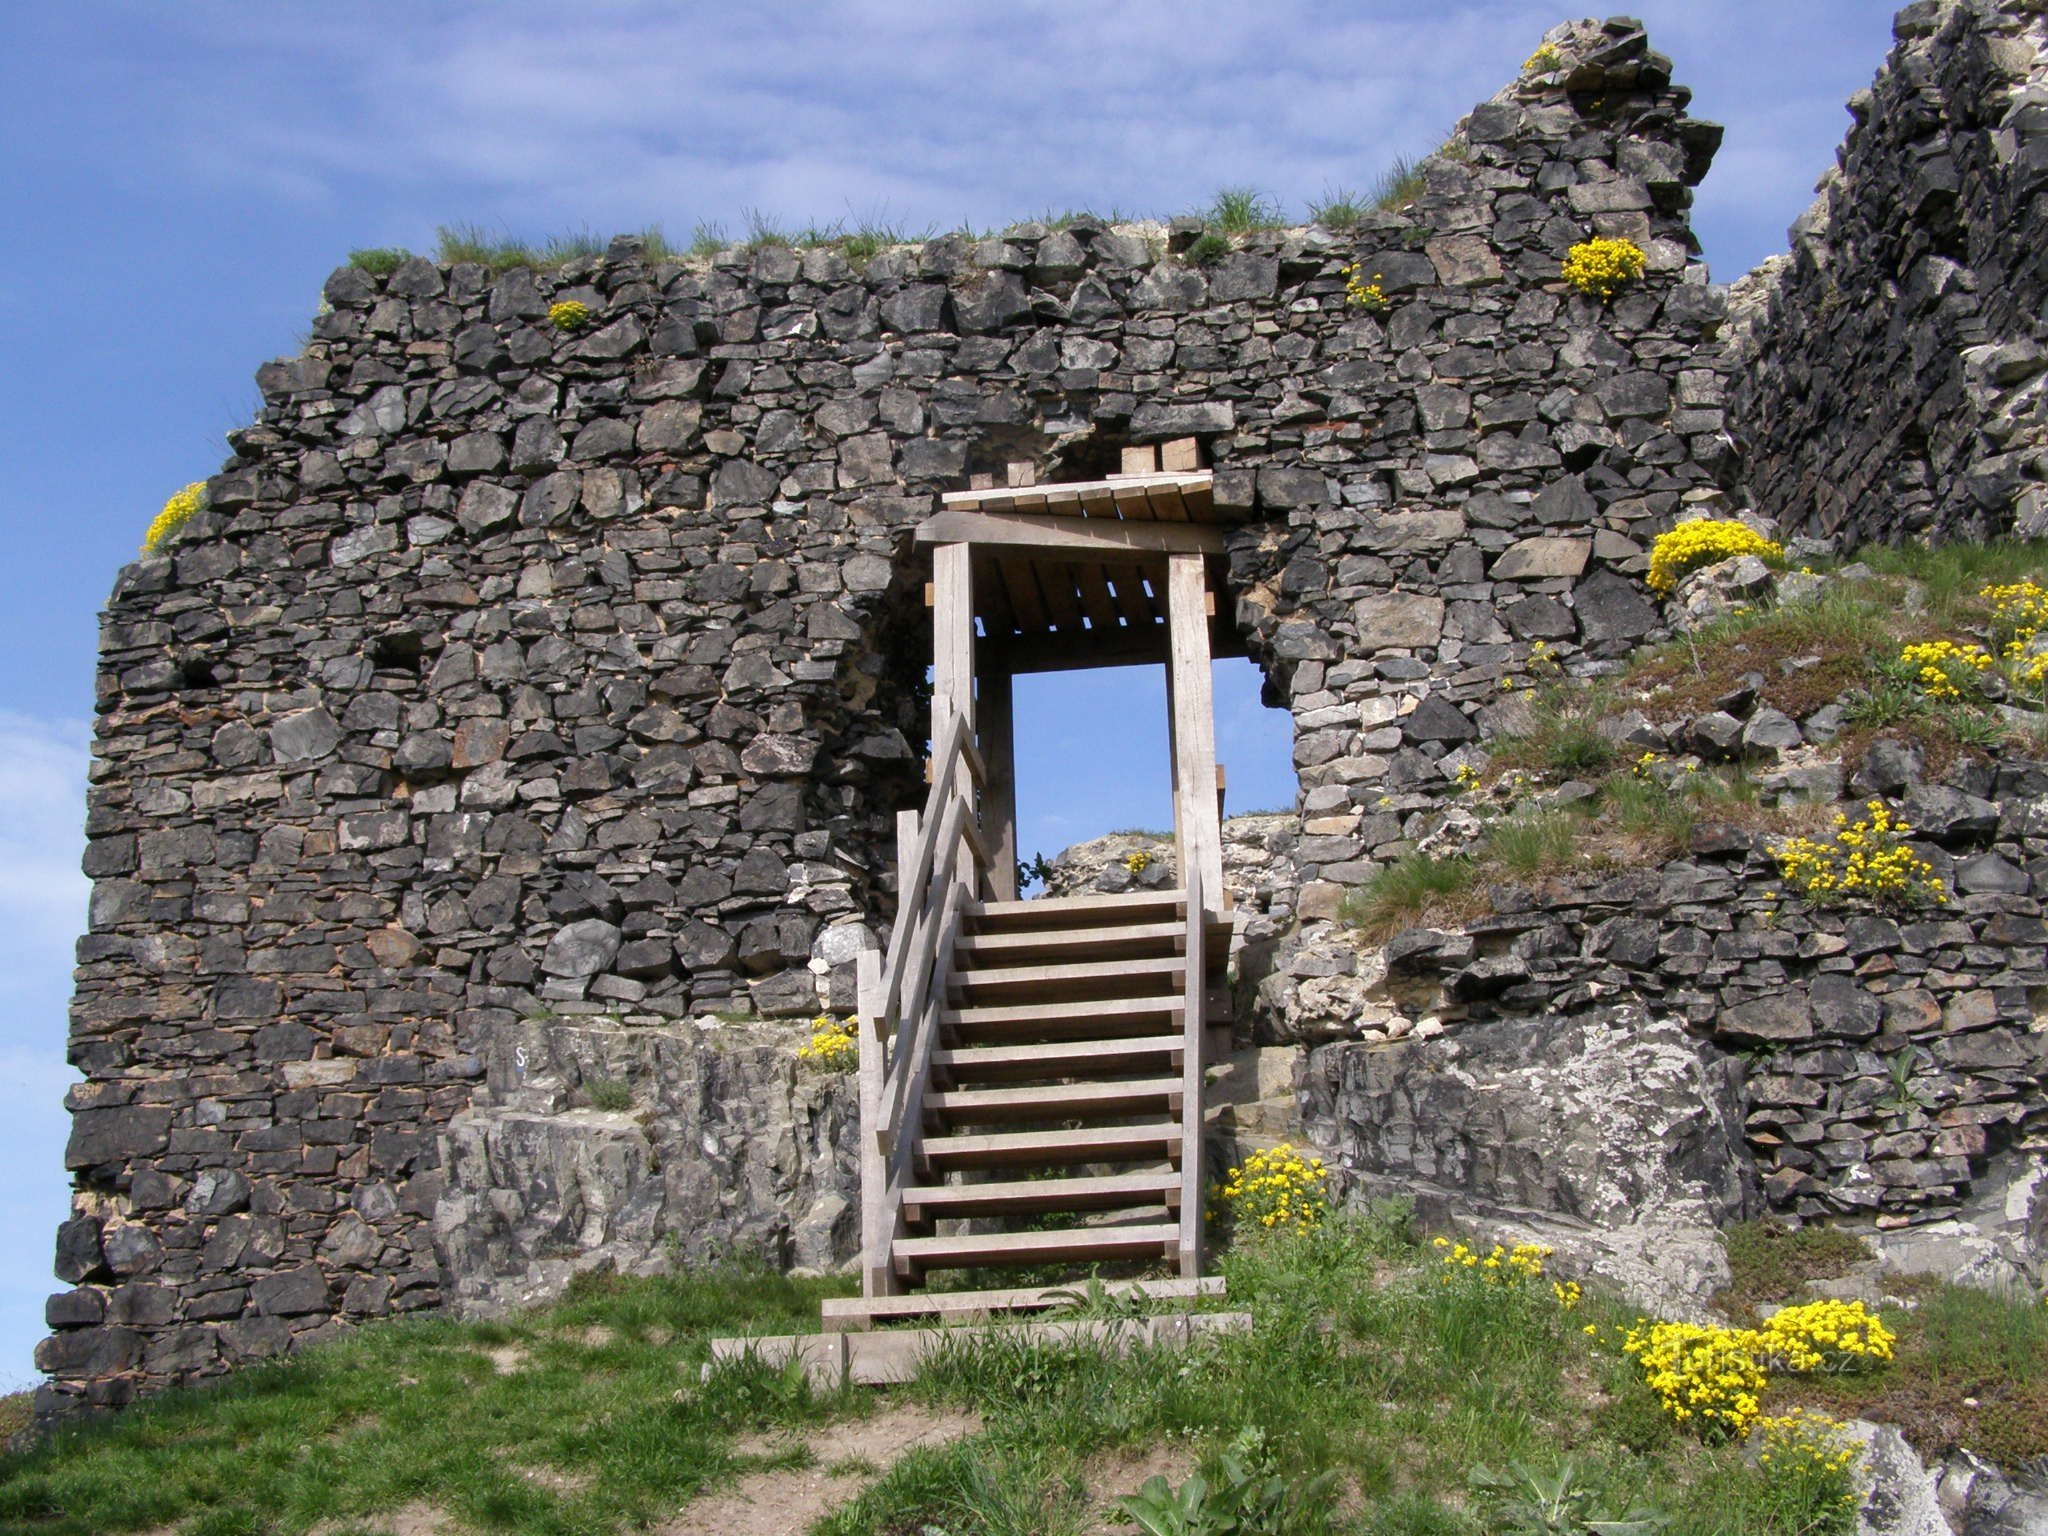 newly built entrance to the castle